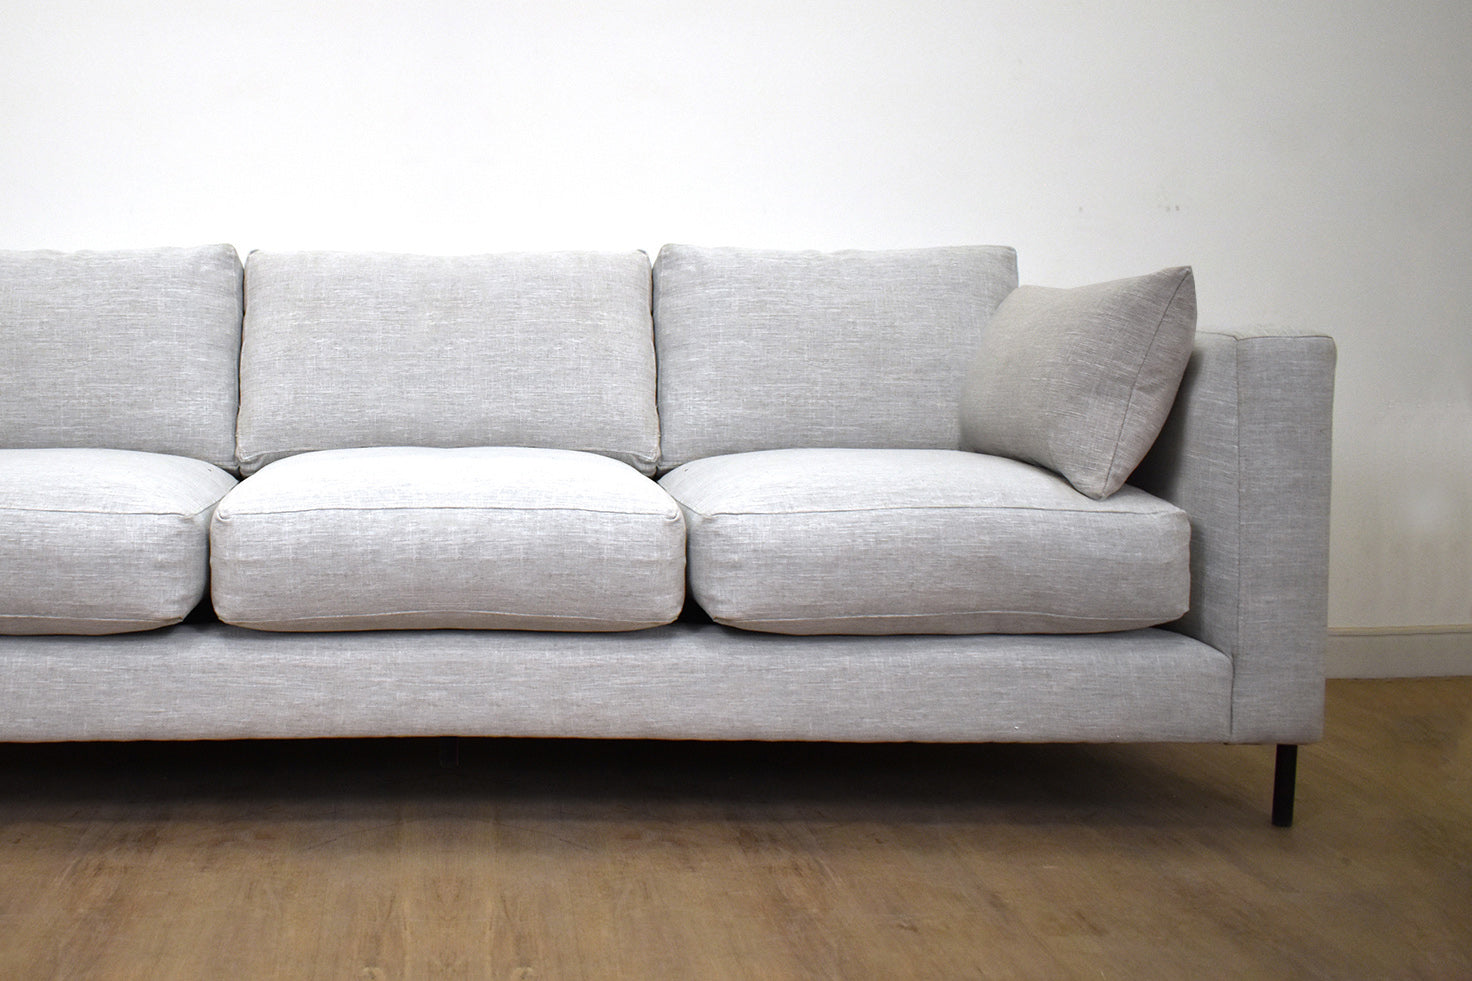 ANDERS CUSTOMIZABLE FABRIC SOFAS AND SECTIONALS